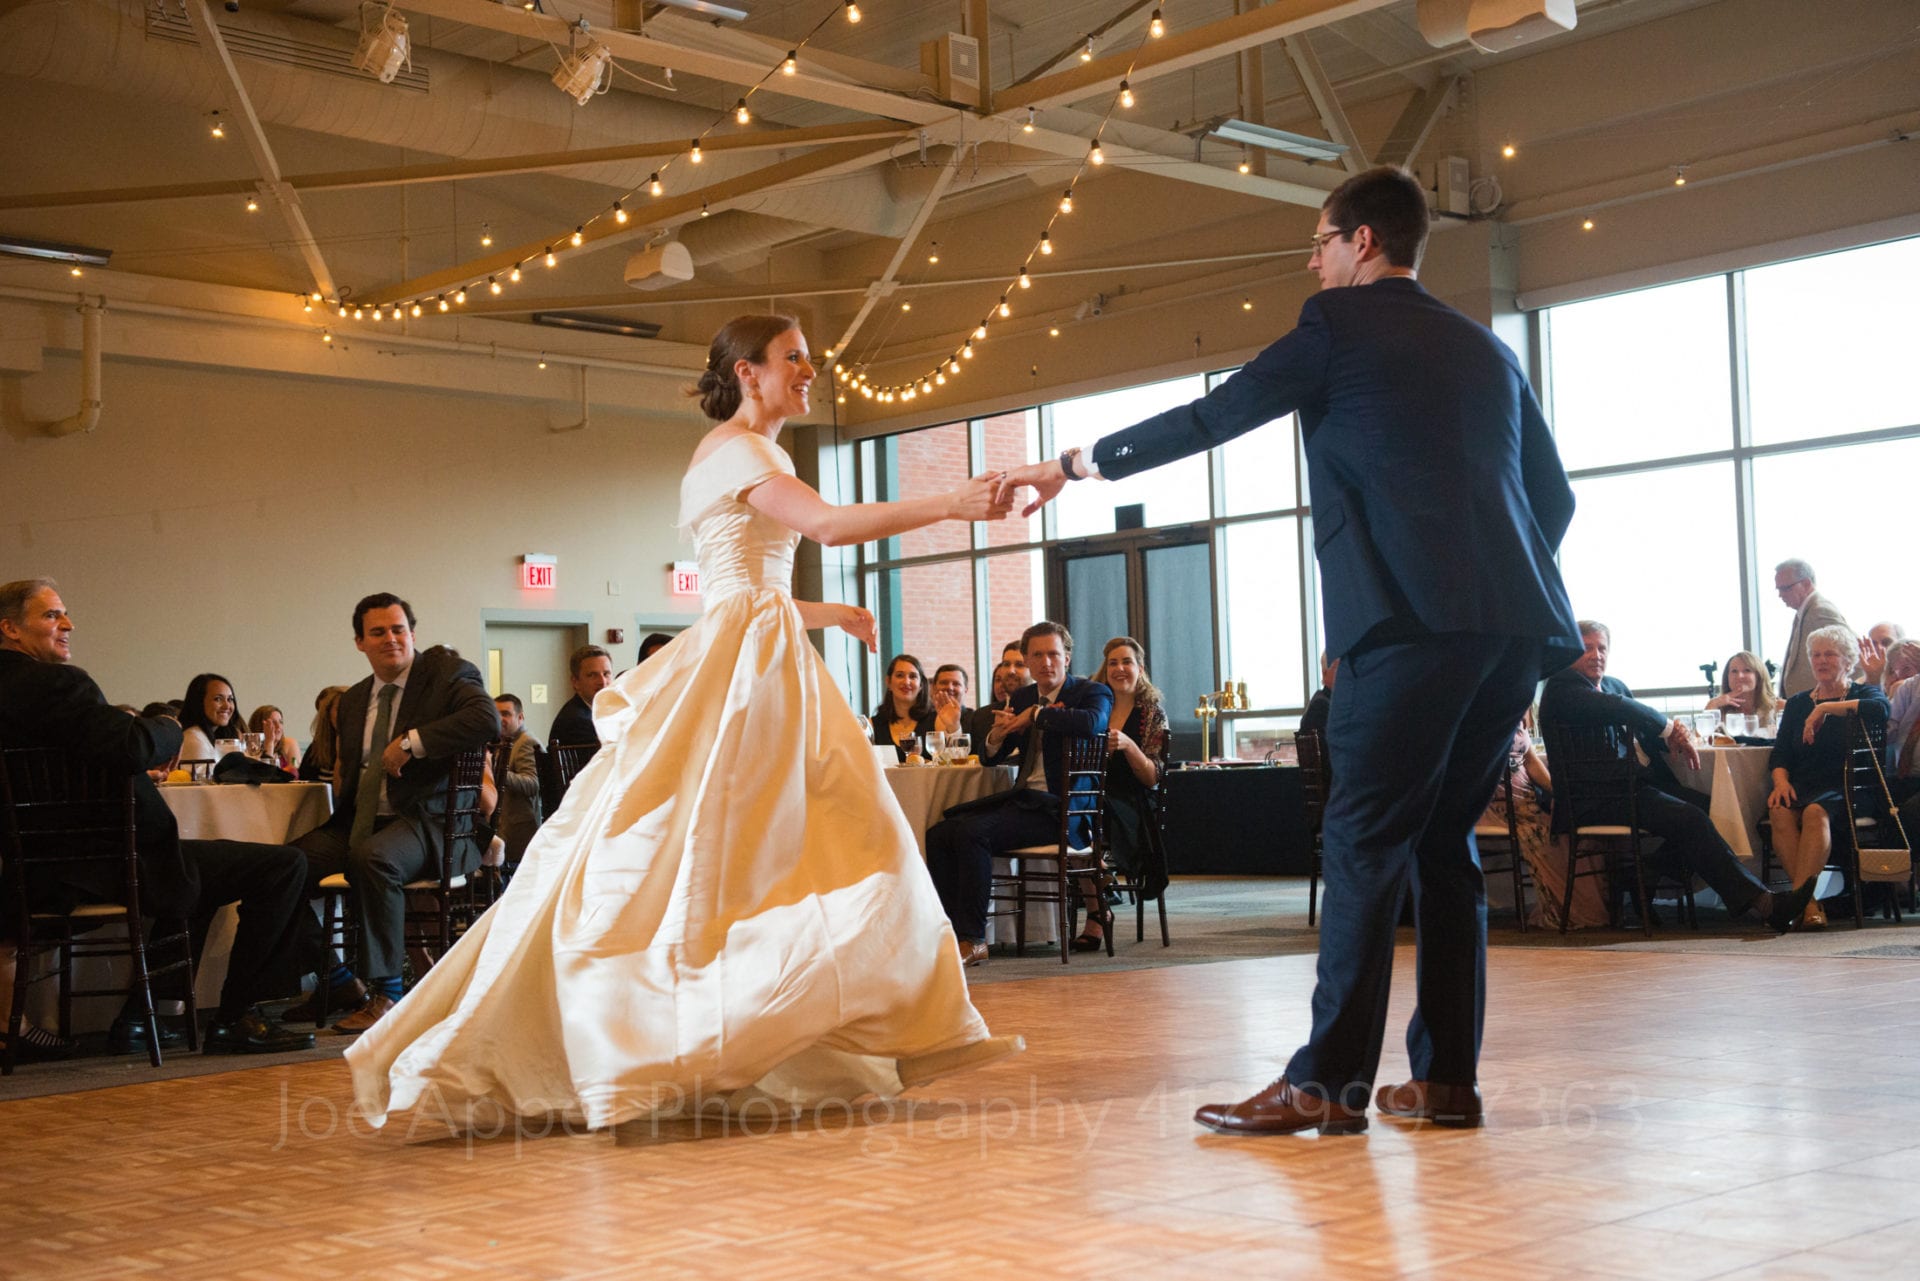 A groom reaches out his arm as he spins his wife during the first dance at their Heinz History Center wedding.